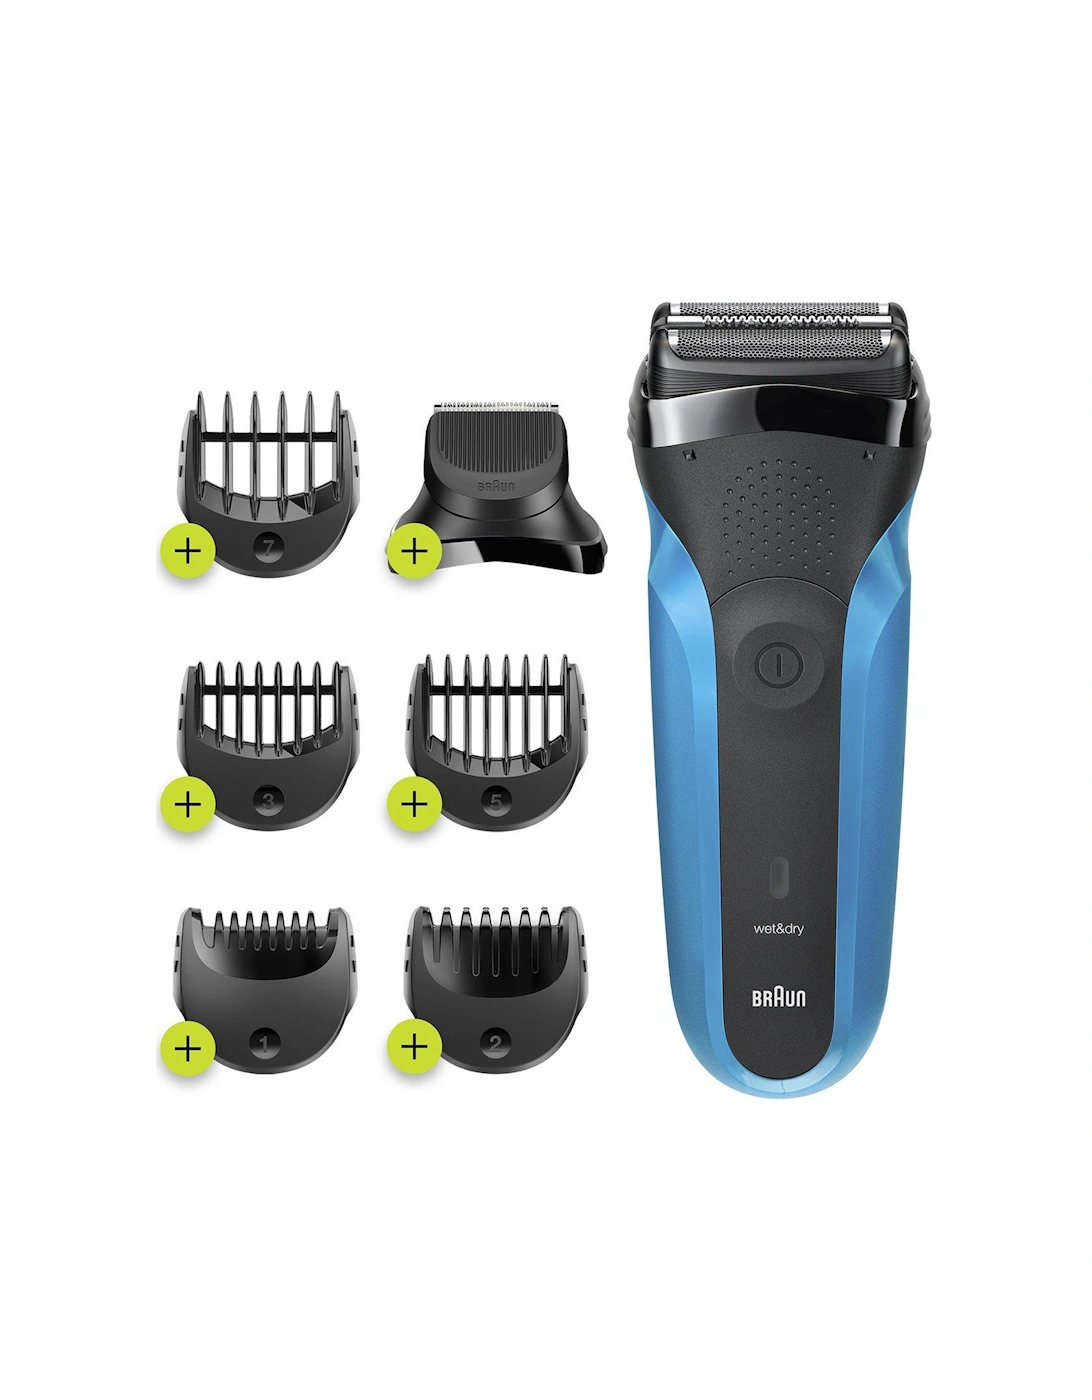 S3 Shave & Style 310BT Electric Shaver, Wet & Dry Razor for Men, 3 of 2